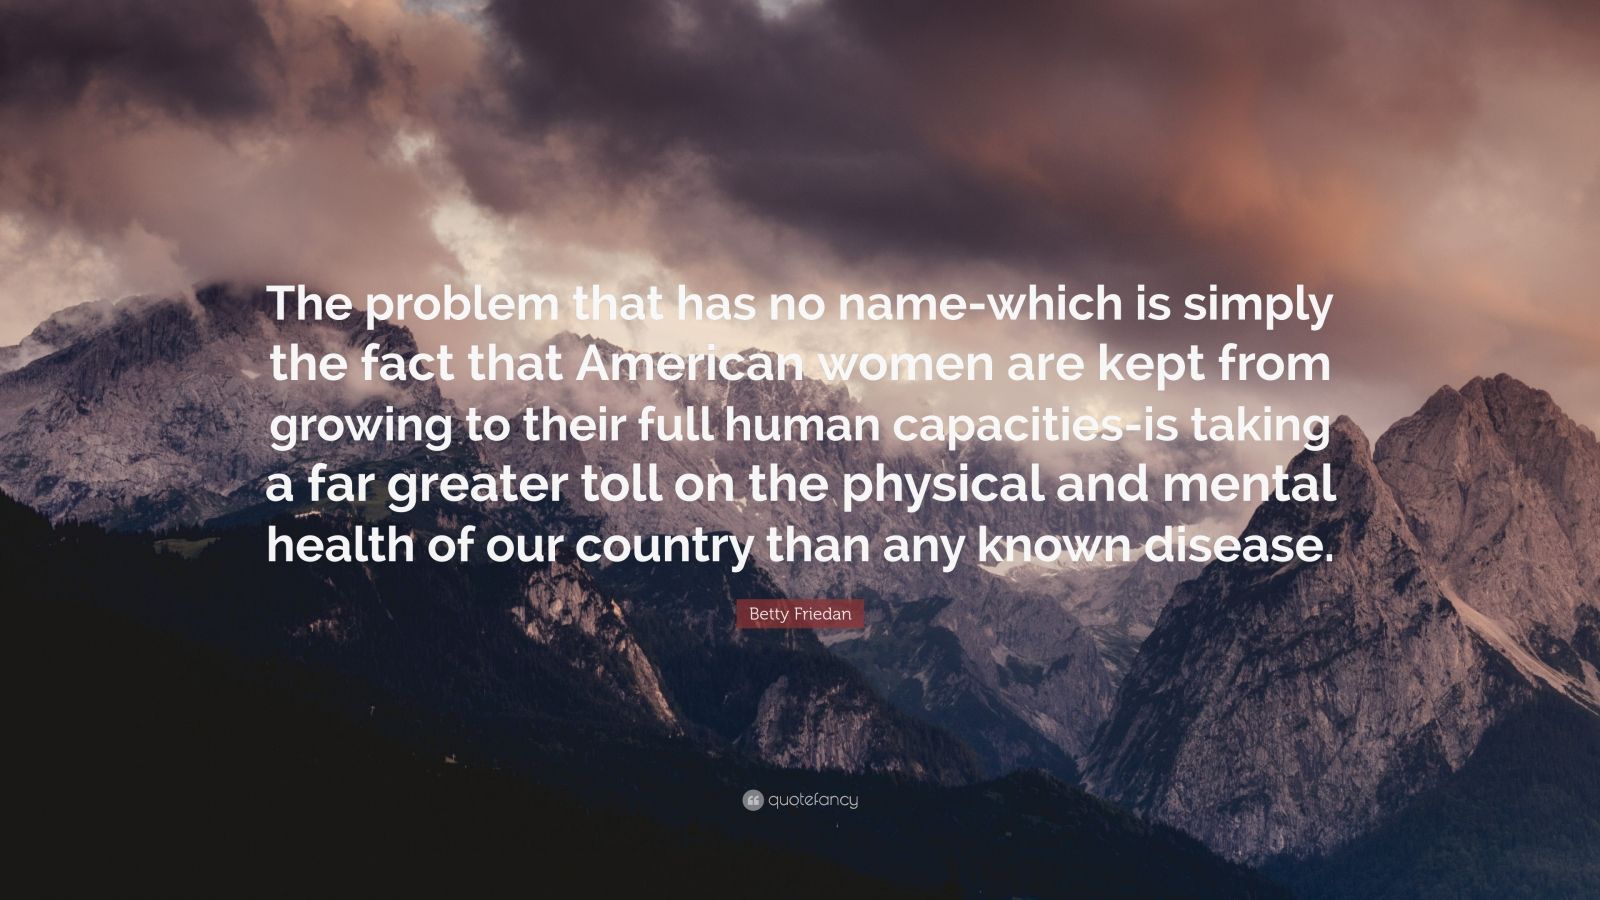 betty friedan the problem that has no name